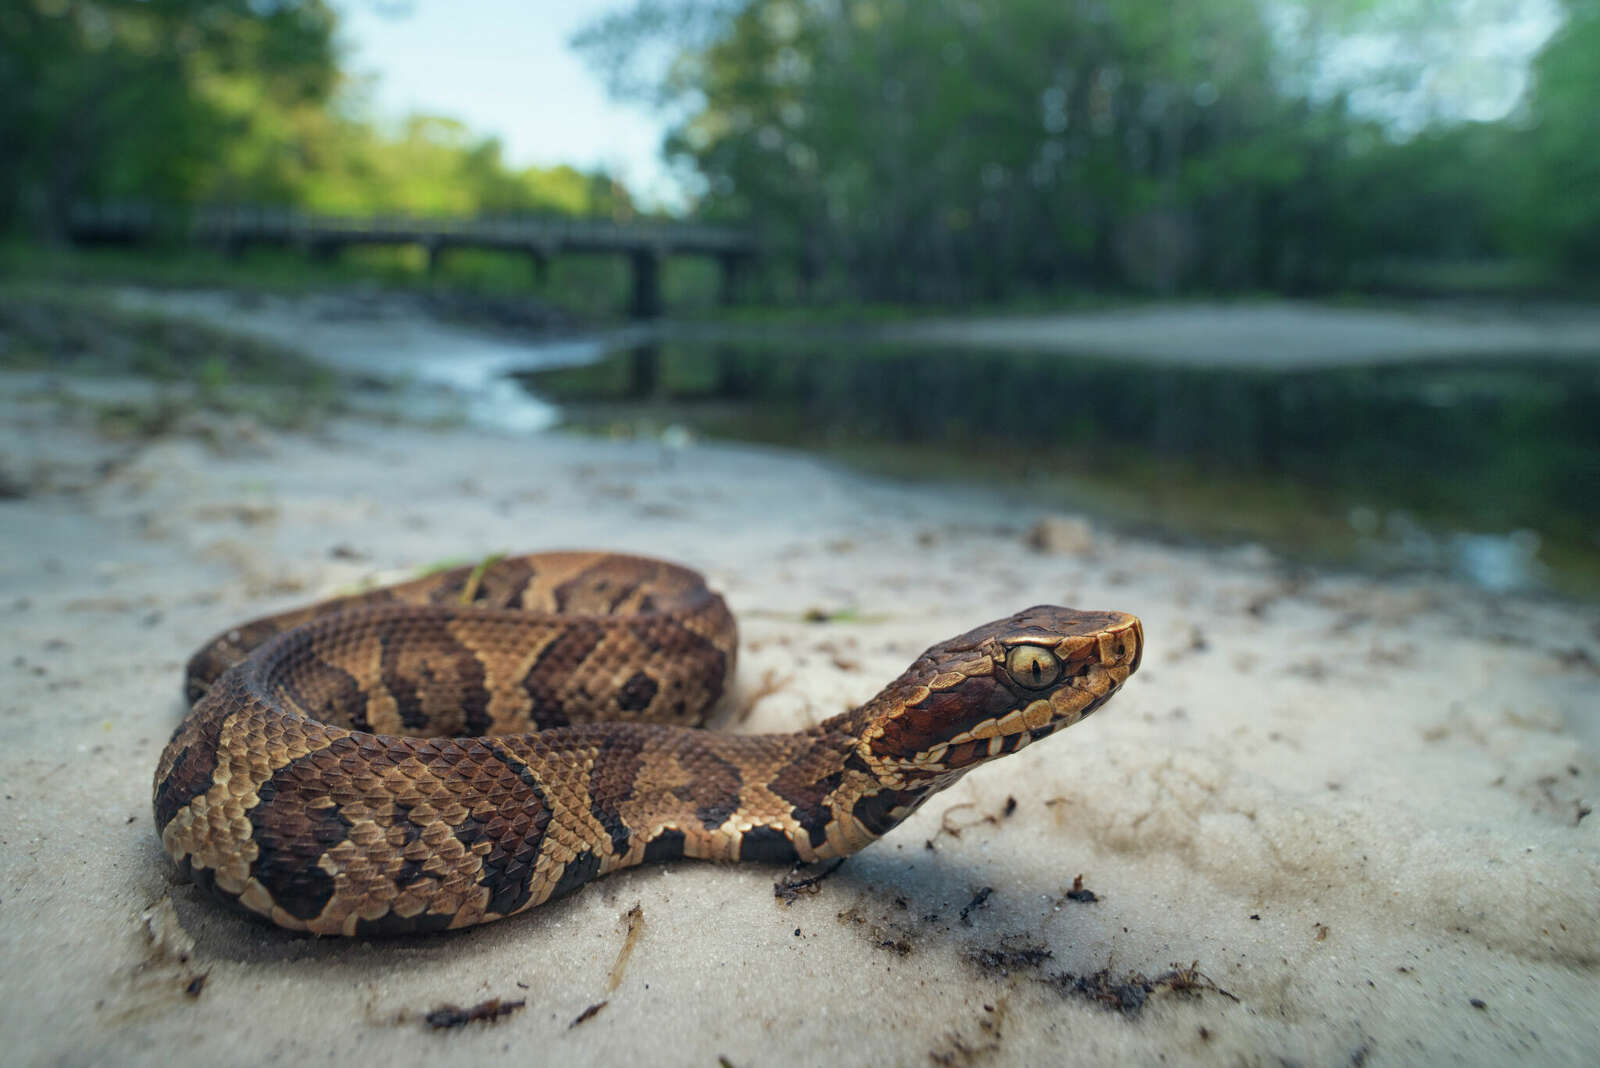 An image of a cottonmouth snake.